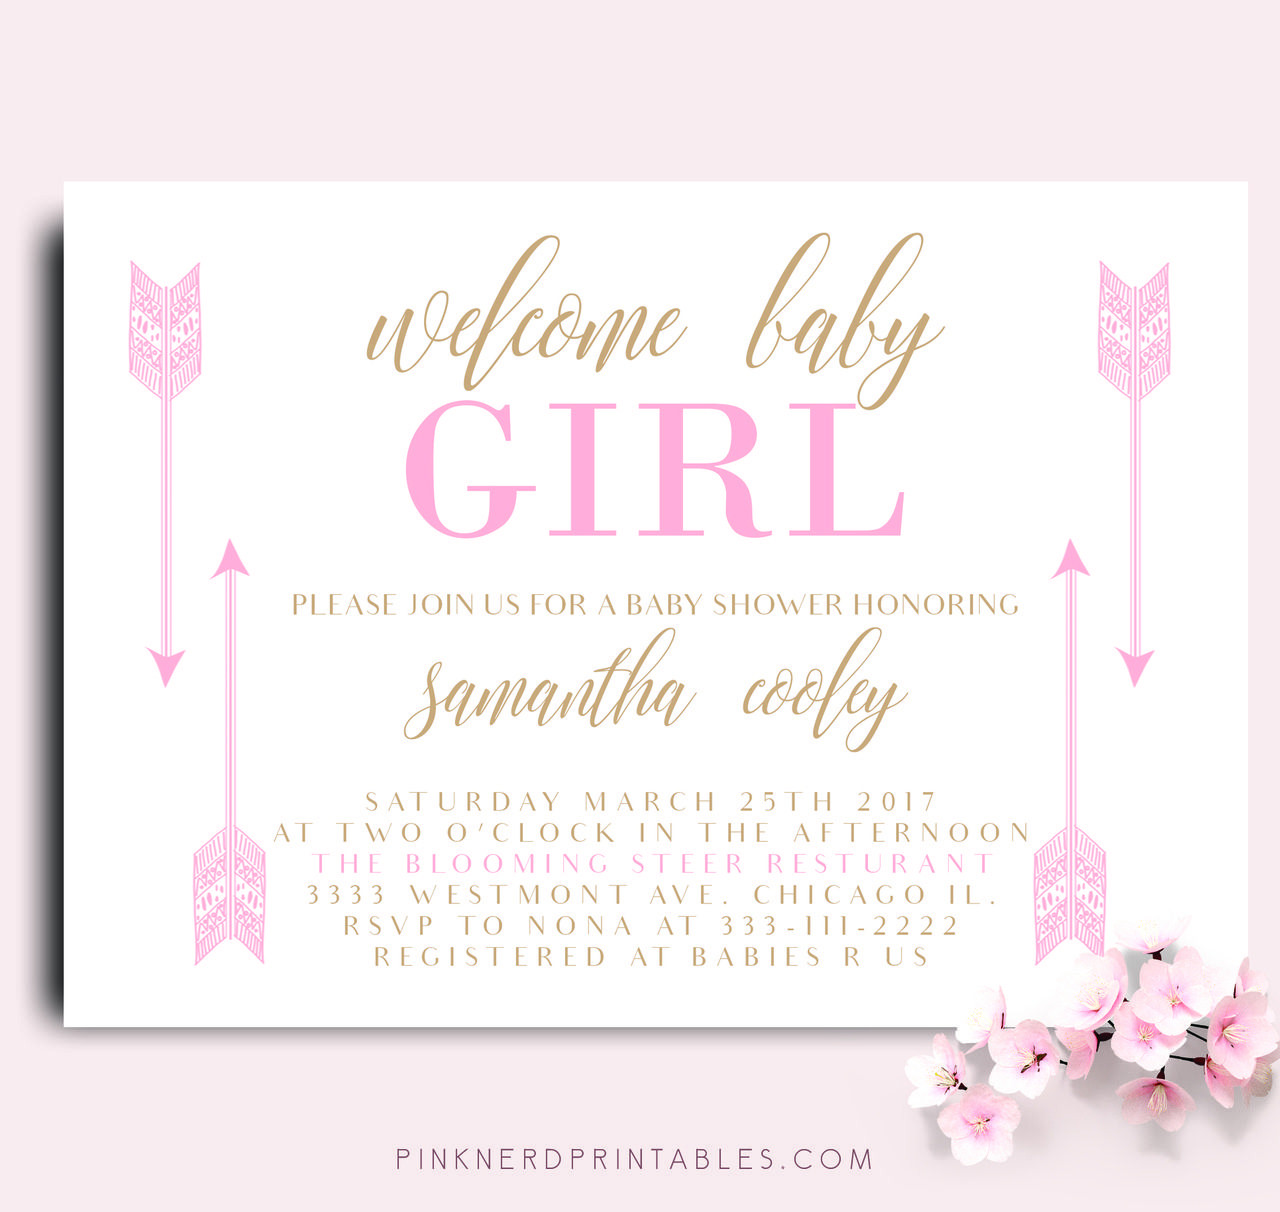 Welcome Baby Party Invitations
 Tribal baby shower invitation arrows baby wel e baby